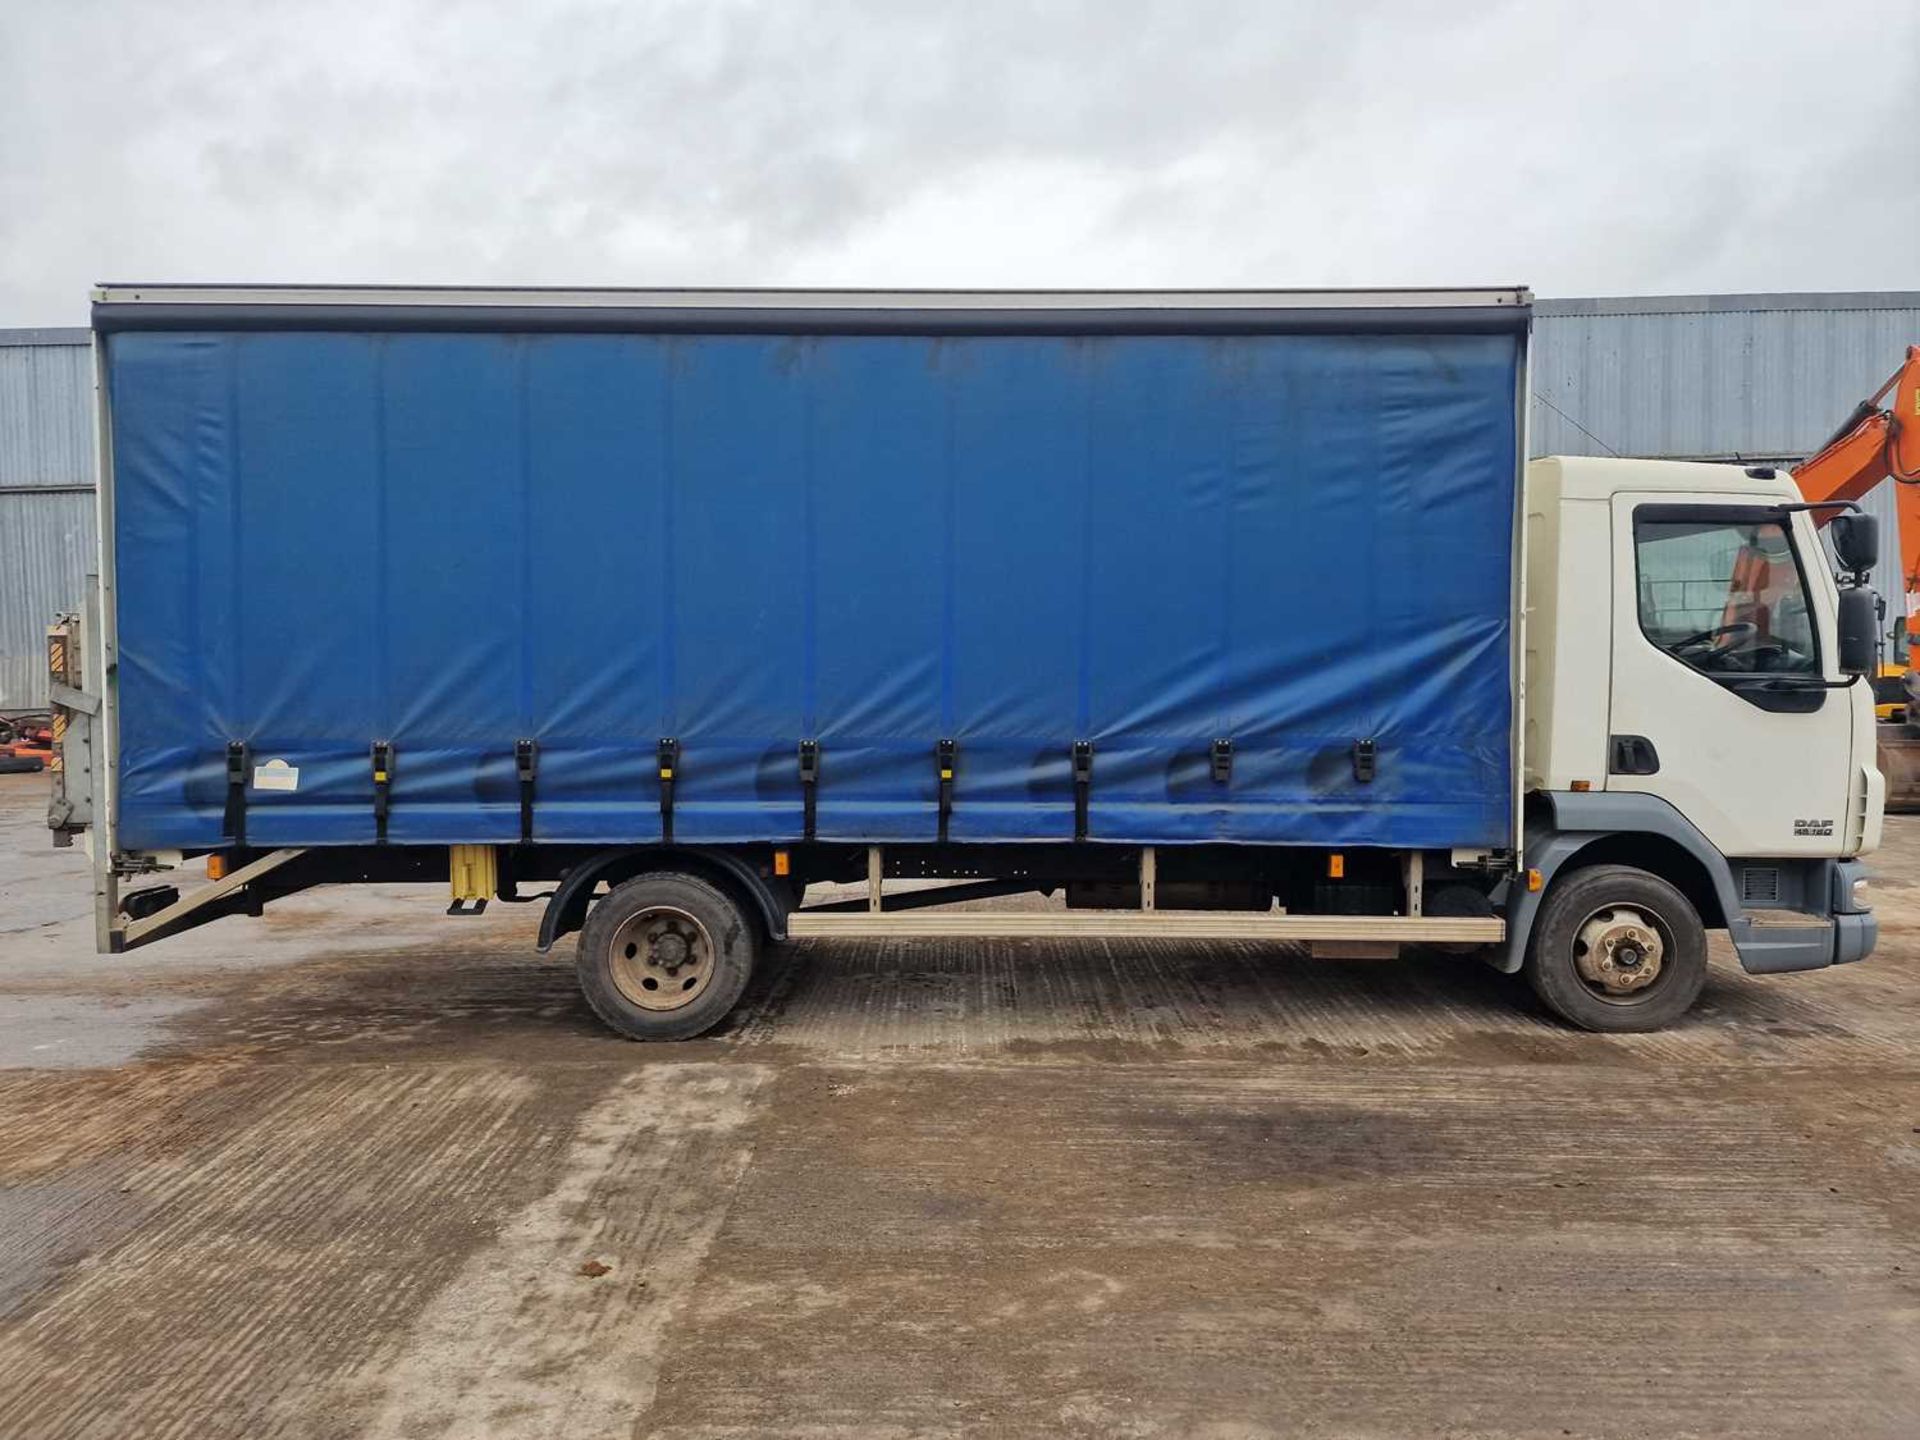 2006 DAF LF45.160 4x2 Curtainsider Lorry, Tailgate, Manual Gear Box (Reg. Docs. Available) - Image 26 of 40